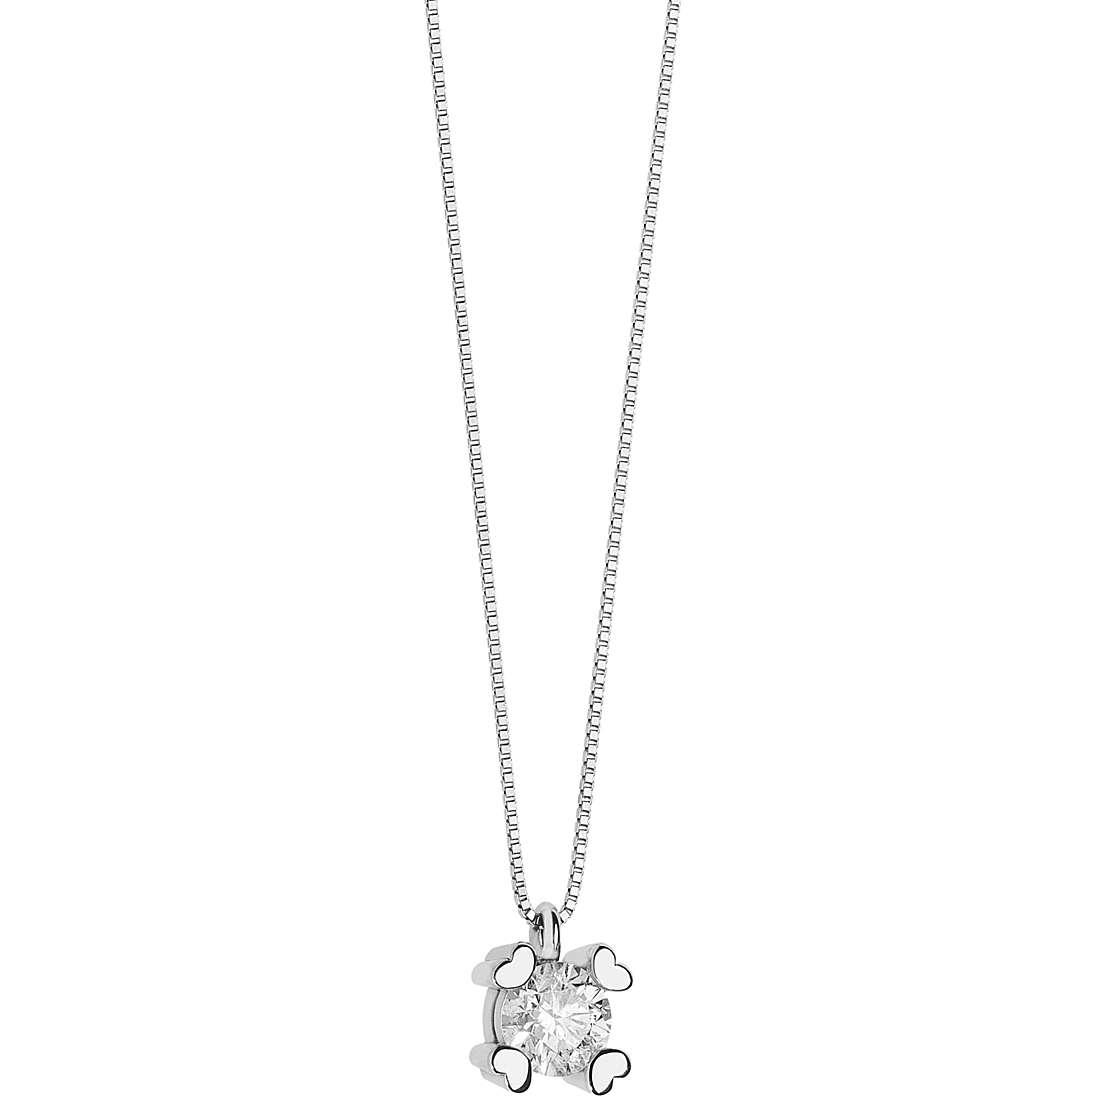 necklace woman jewellery Comete Punti Luce GLB 1454